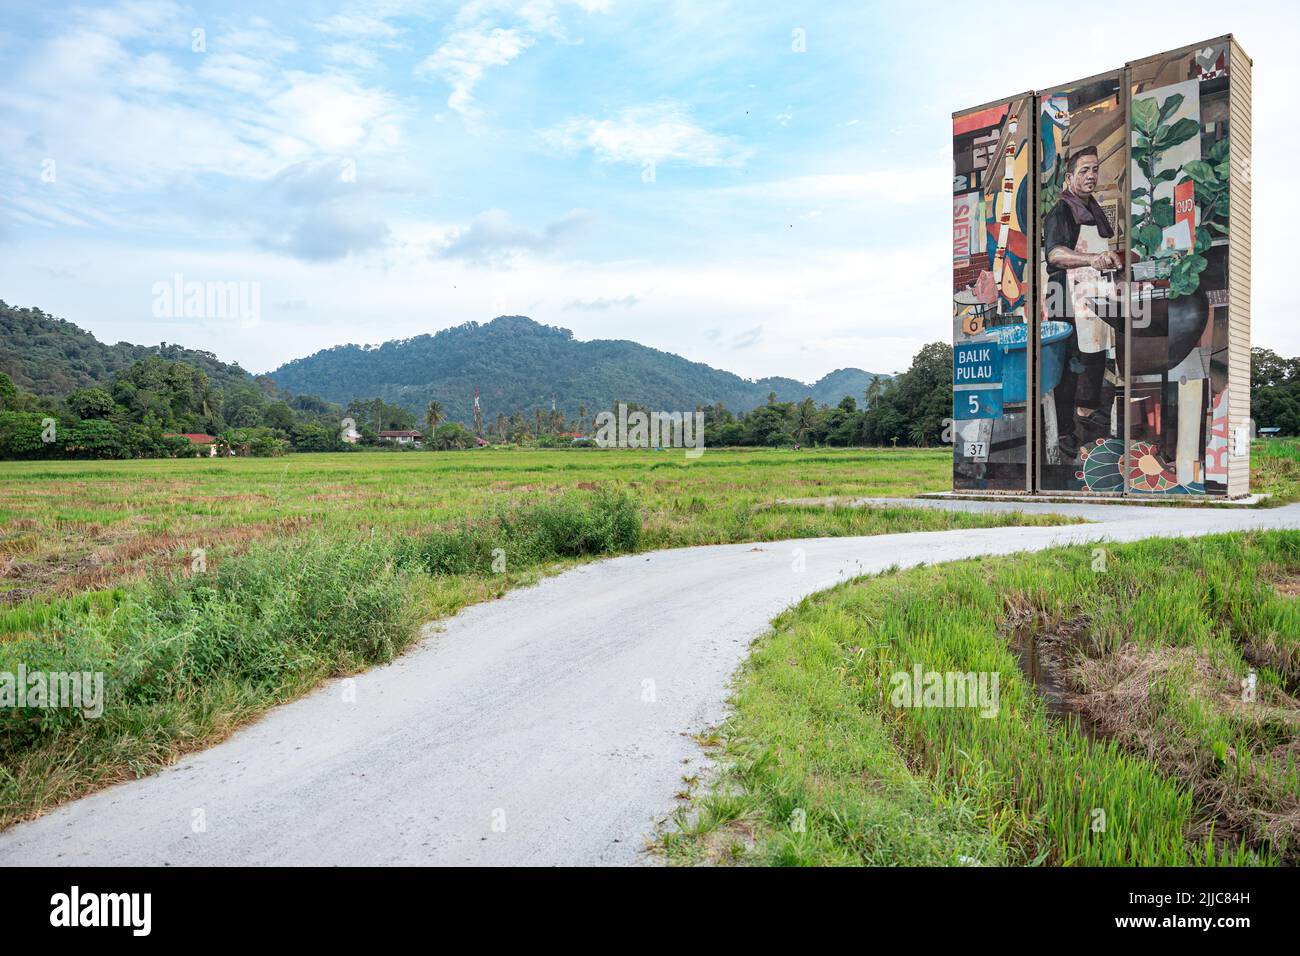 Penang Container Art located in the middle of paddy field. This art currently display at Balik Pulau, Penang Island. Stock Photo